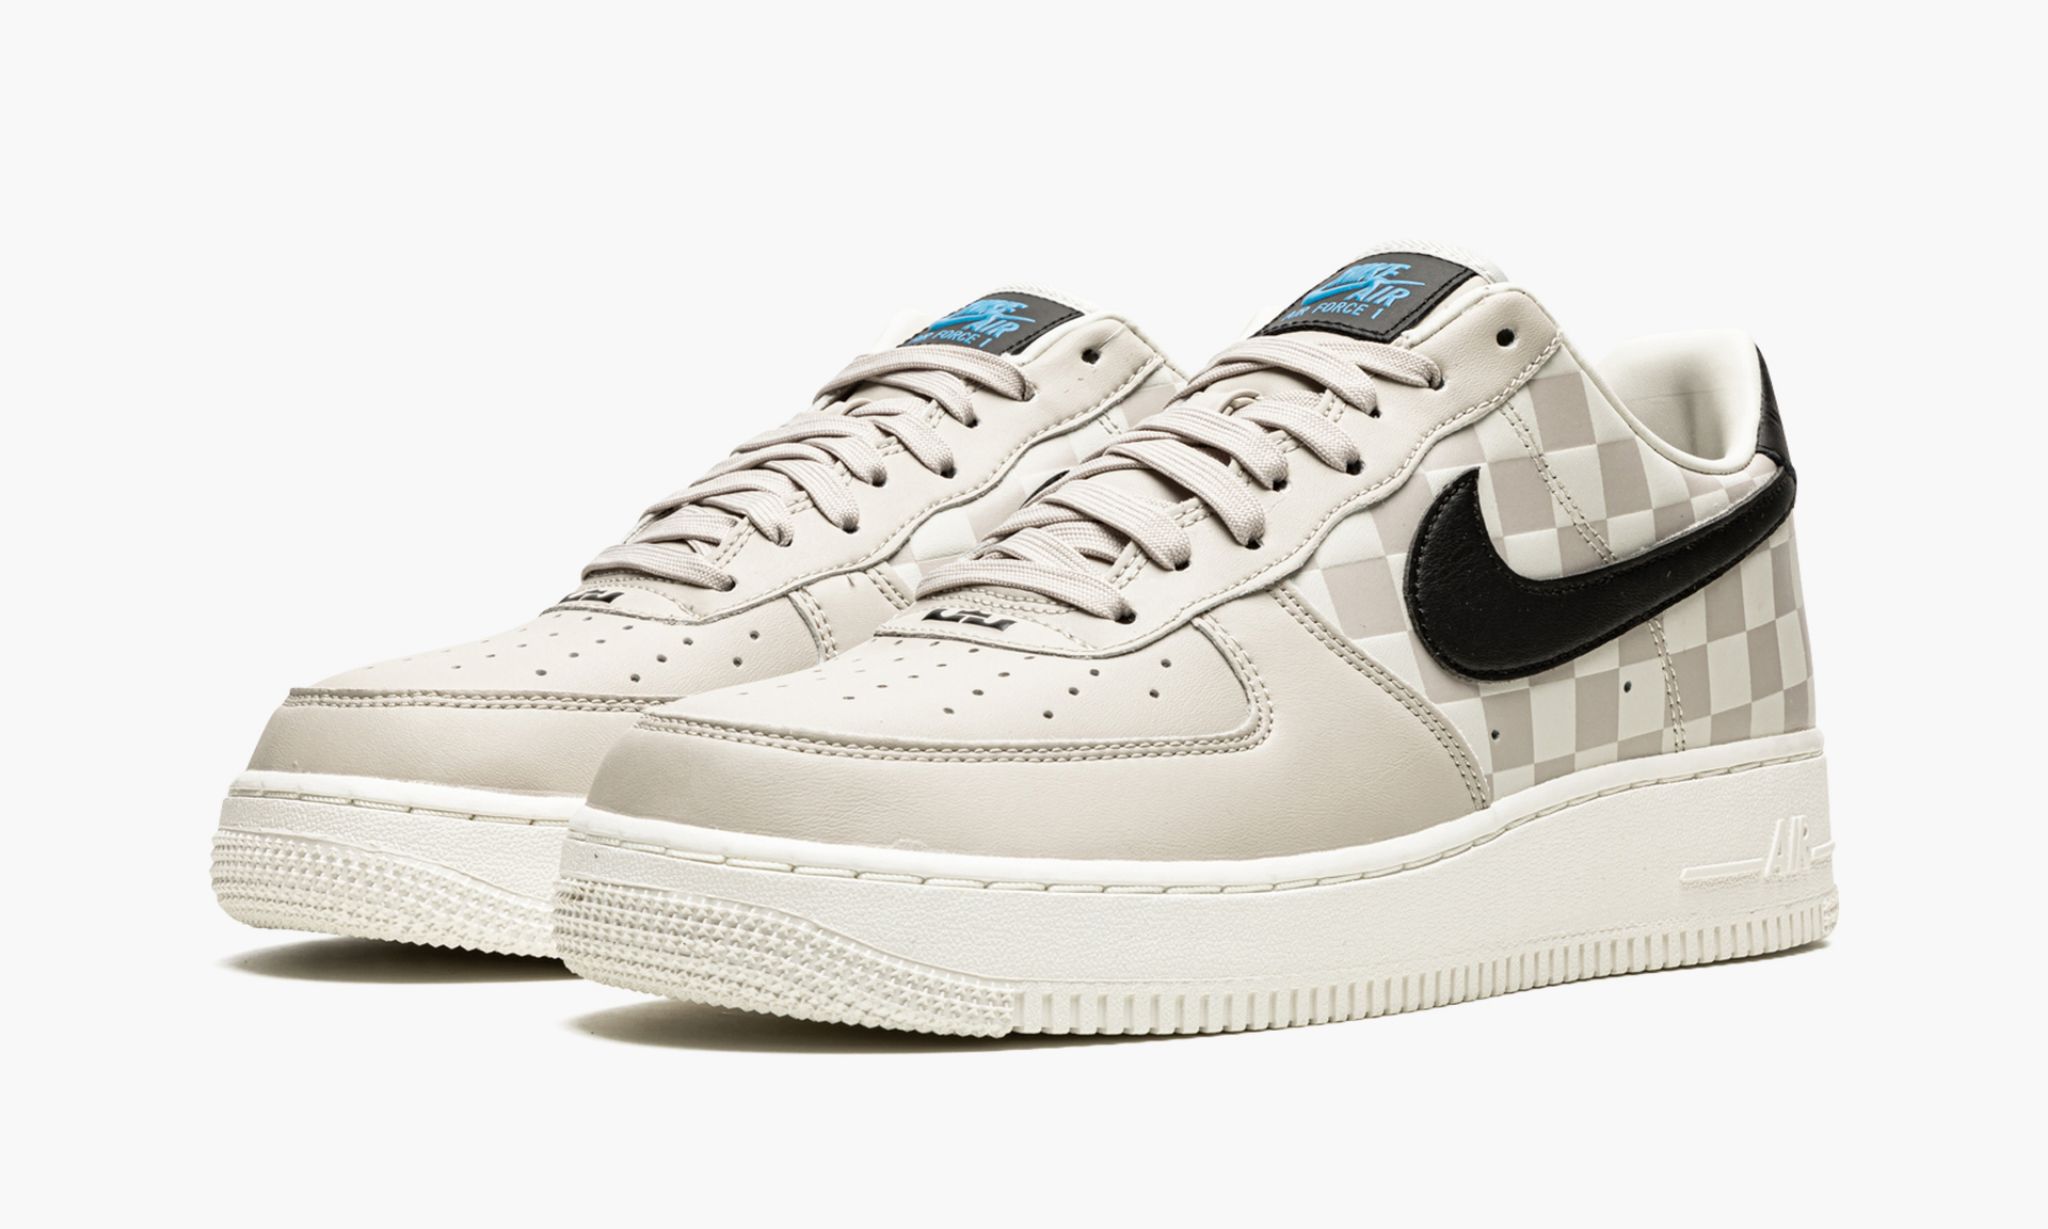 Shop Nike Air Force 1 Low LeBron James Strive For Greatness at 3KICKS